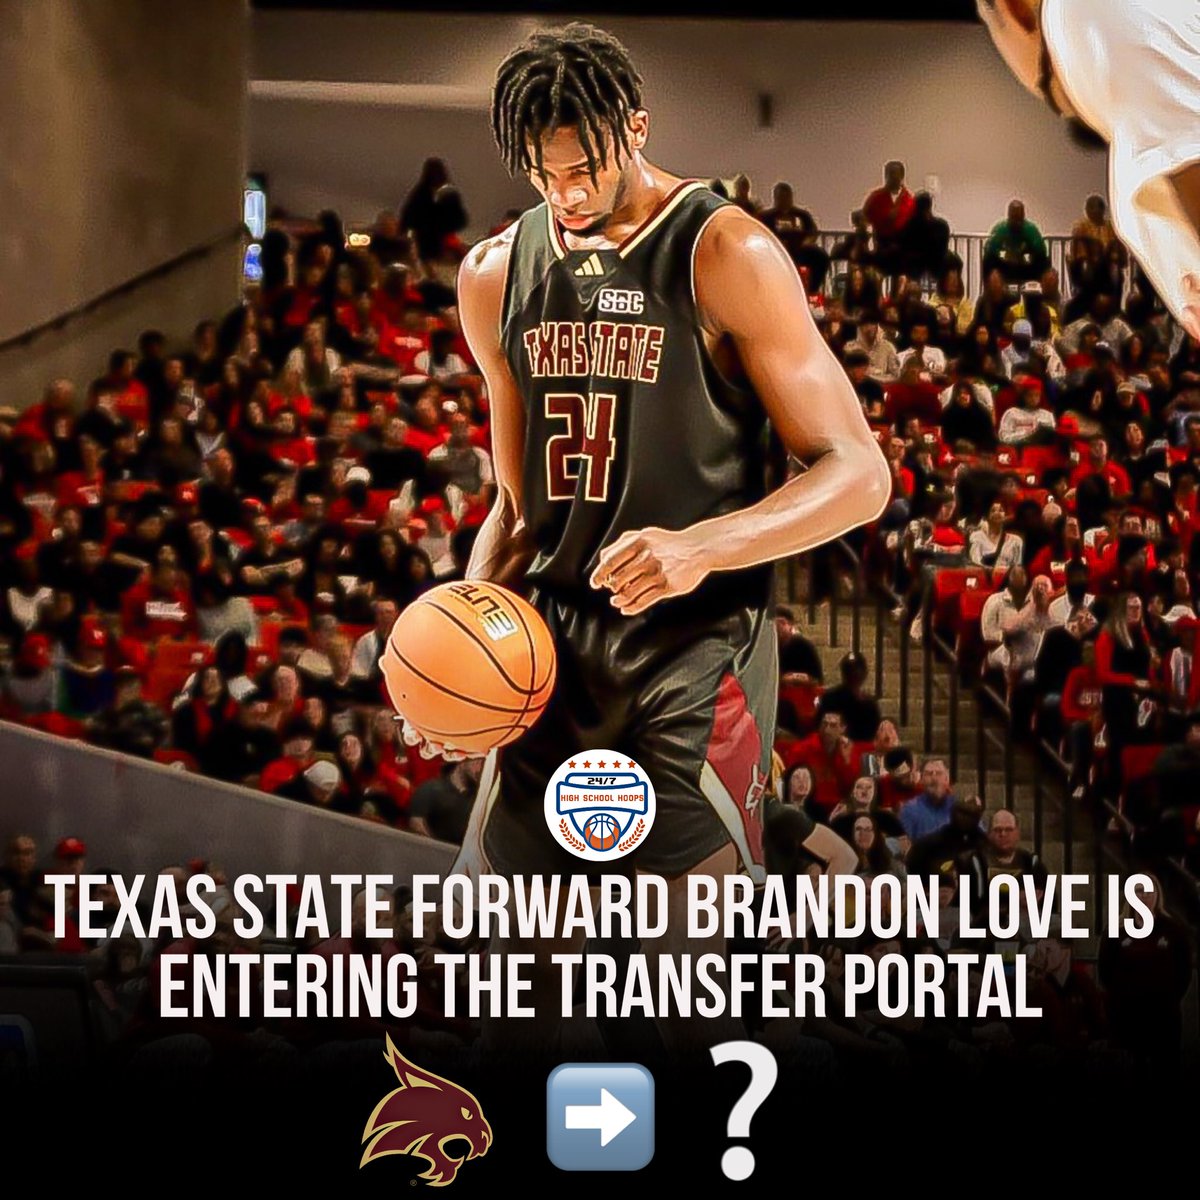 NEWS: Texas State forward Brandon Love is entering the transfer portal, a source tells me. Love has spent his entire three-year collegiate career at Texas State and has continued to improve in each season. Started all 34 games this year for the Bobcats. He averaged 10.4PPG,…